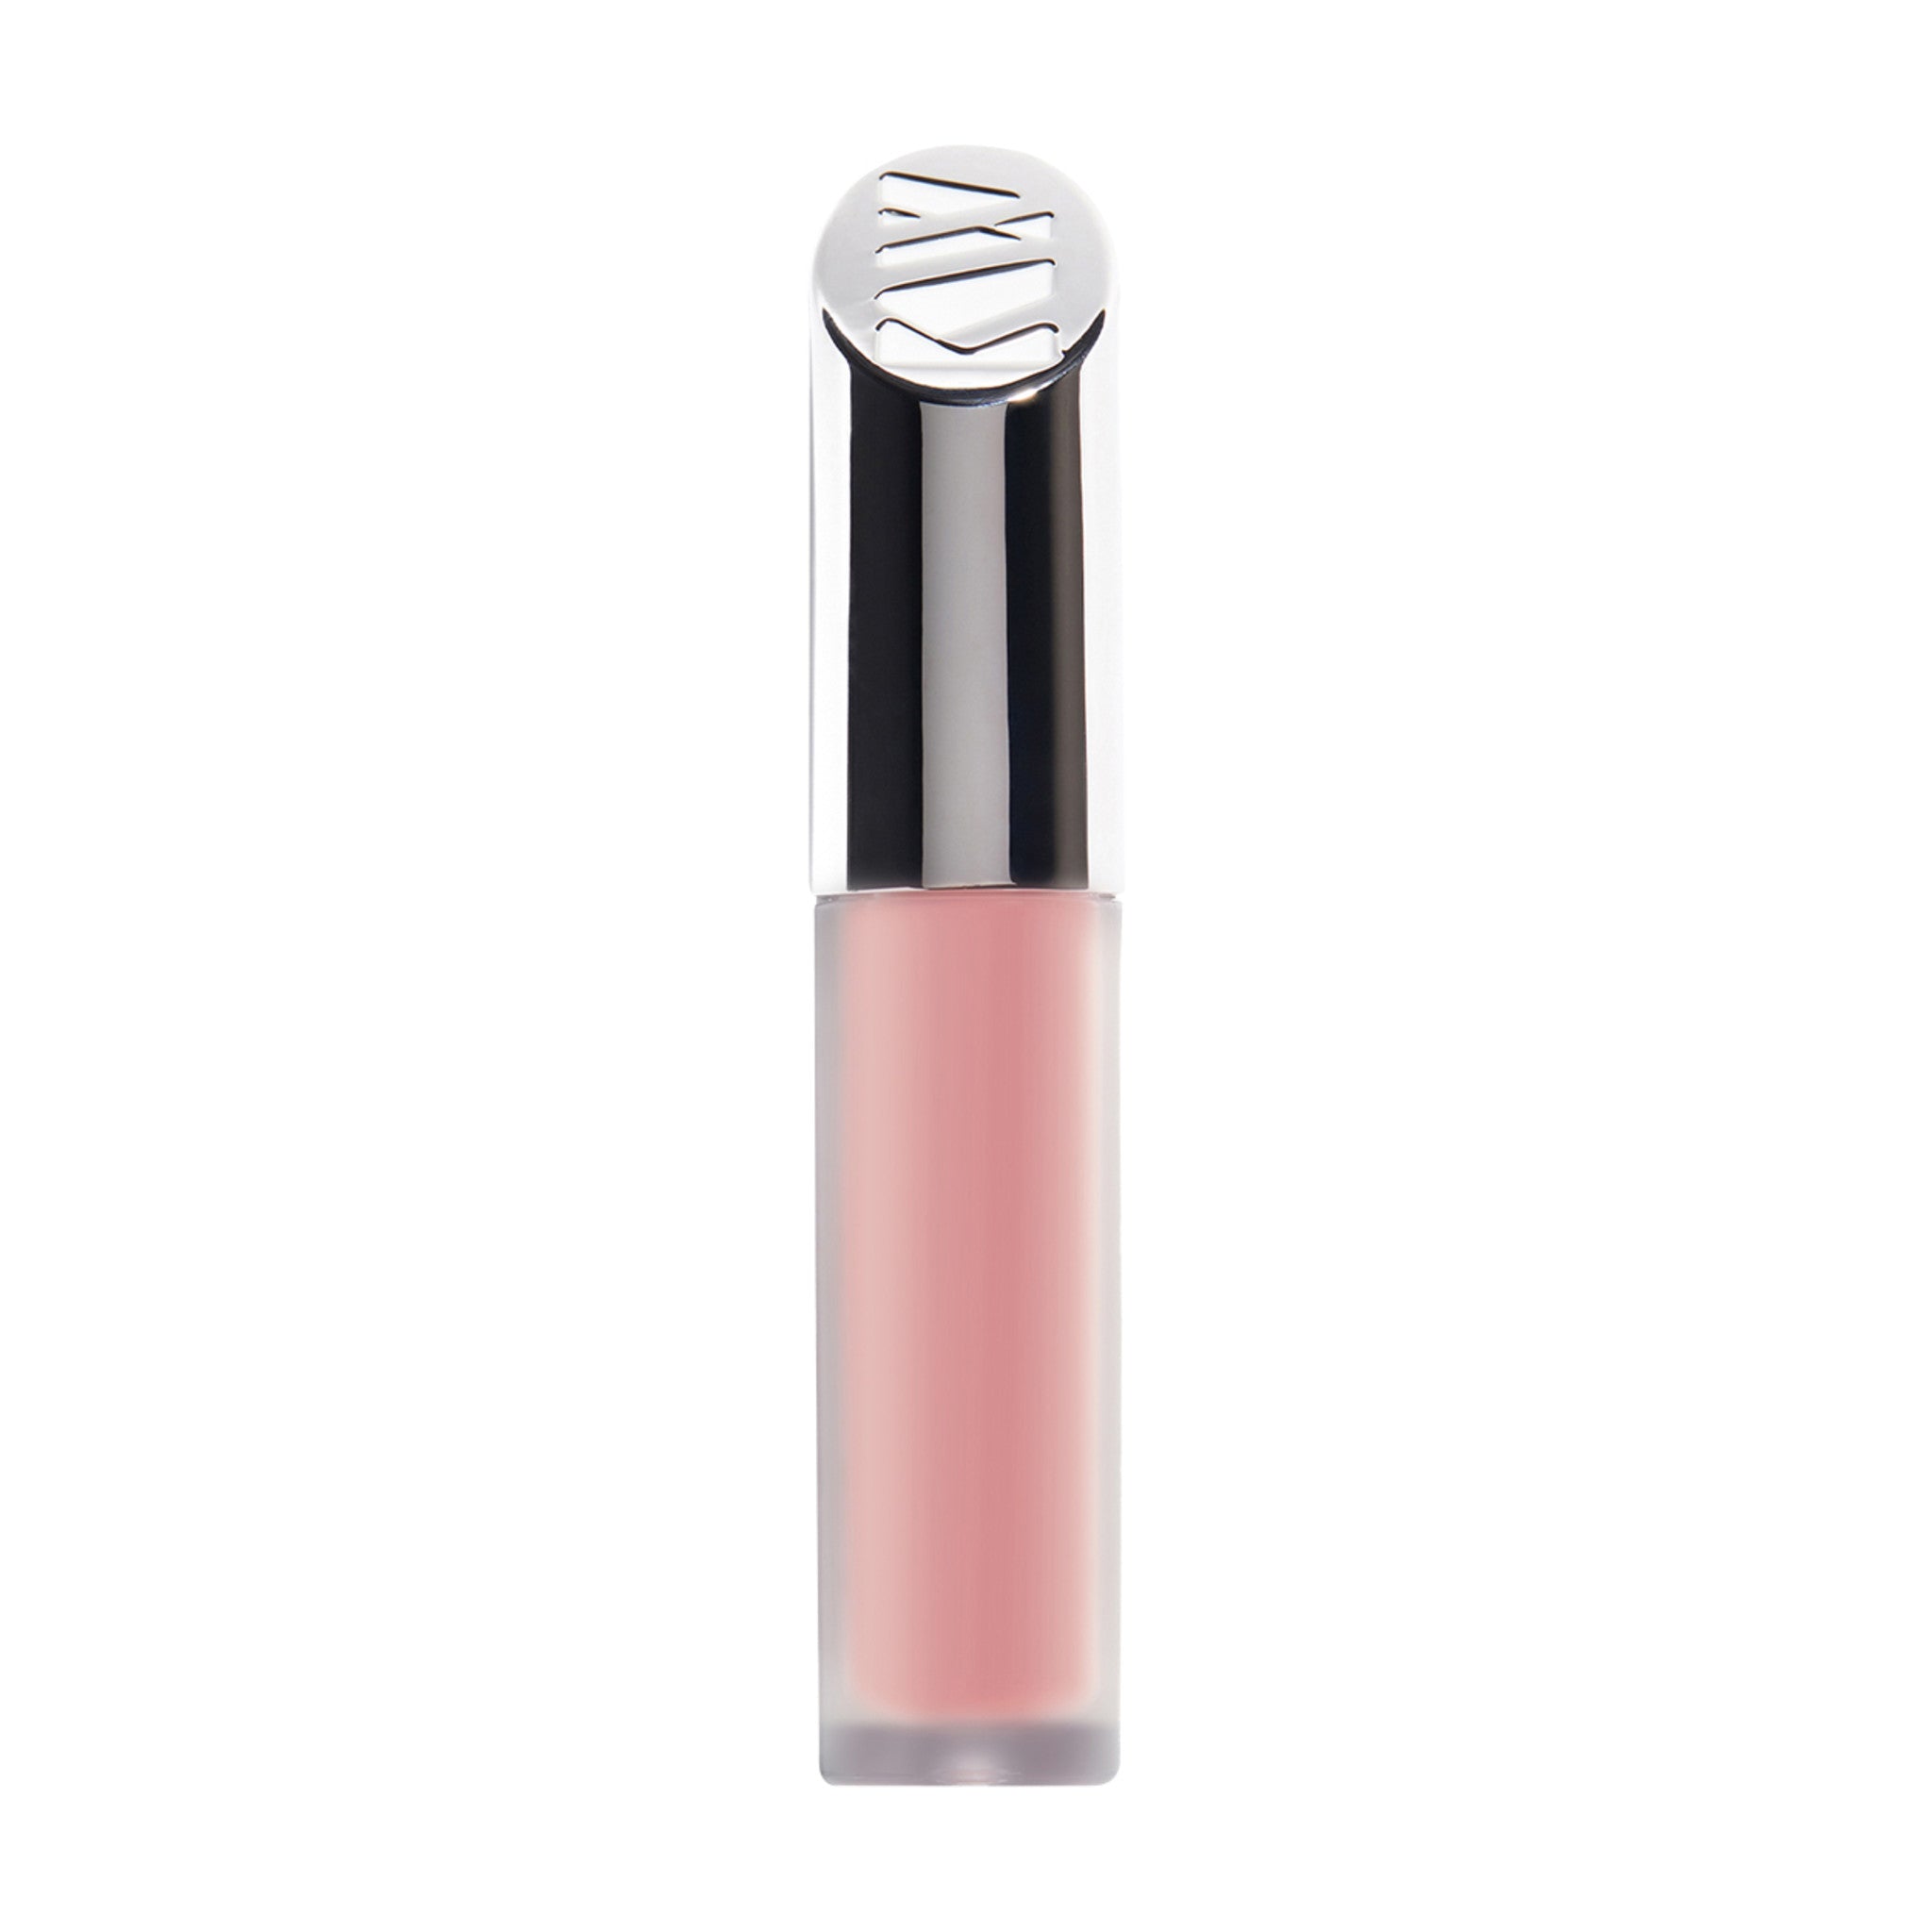 Kjaer Weis Matte, Naturally Liquid Lipstick Color/Shade variant: Honor main image. This product is in the color pink